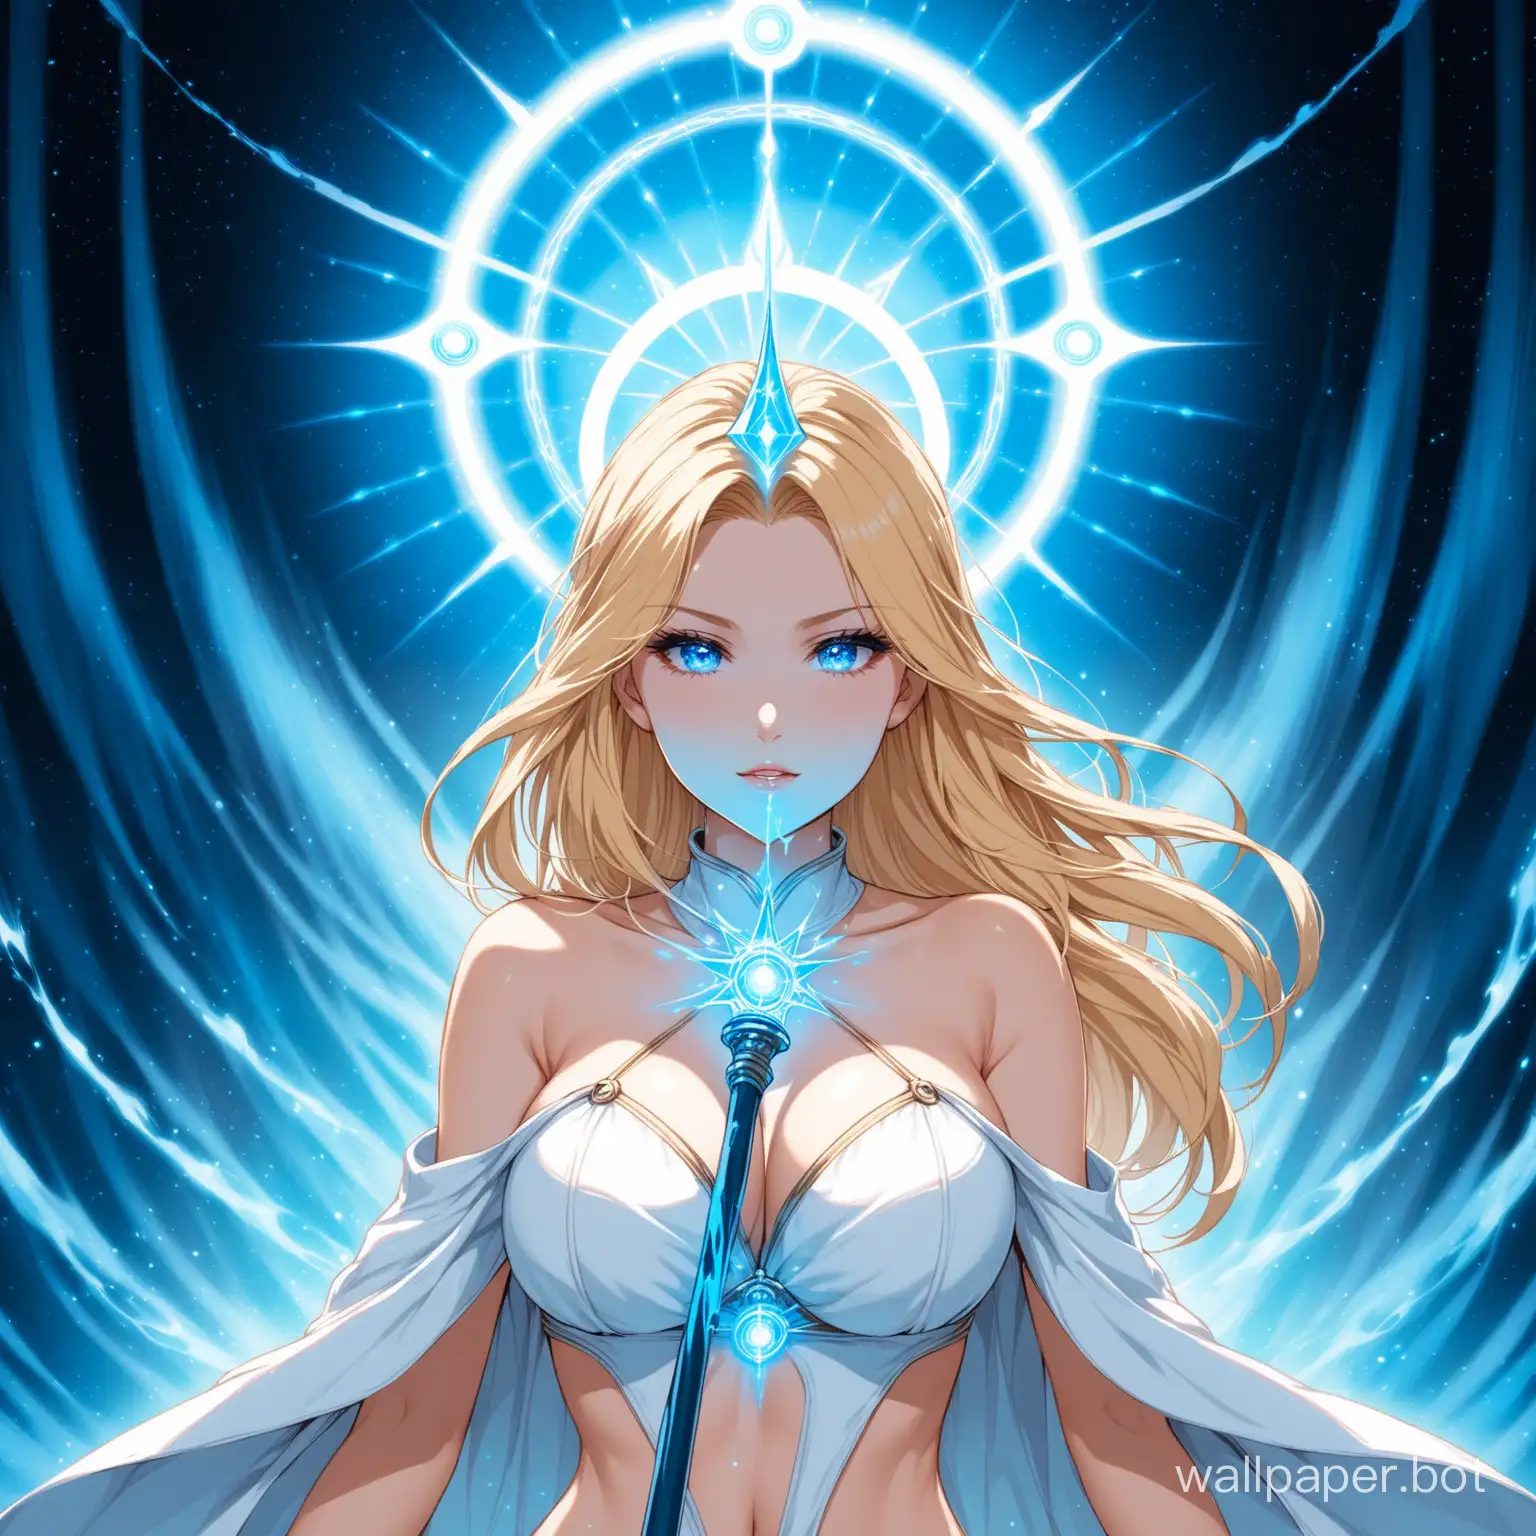 blond sexy female
seducing eyes
holding a wizard staff
blue aura around the staff
heaven background
halo above her head
breasts are covered with white clothes